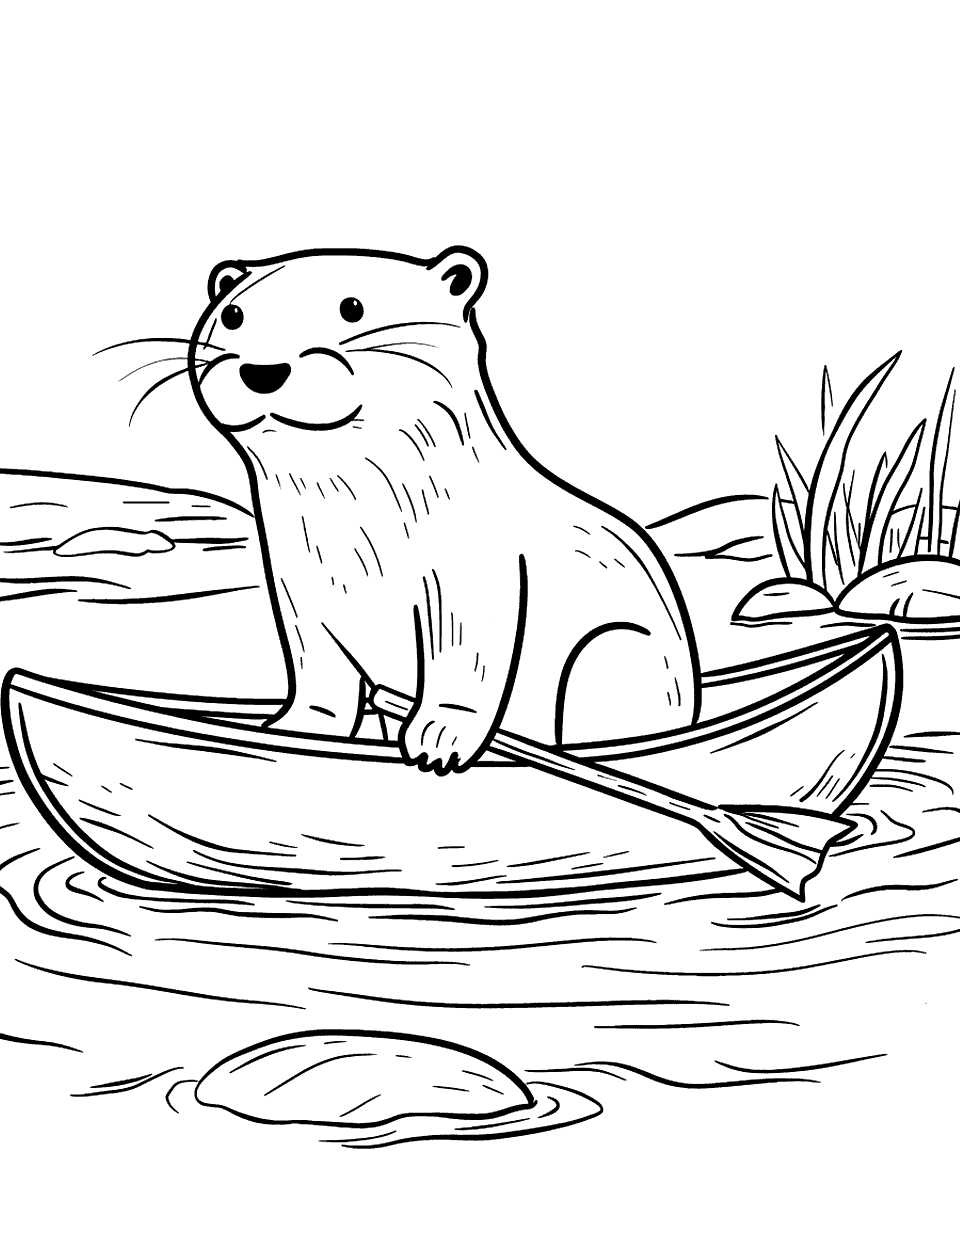 Otter in a Canoe Coloring Page - An otter sitting in a small canoe, paddling gently down a calm river.